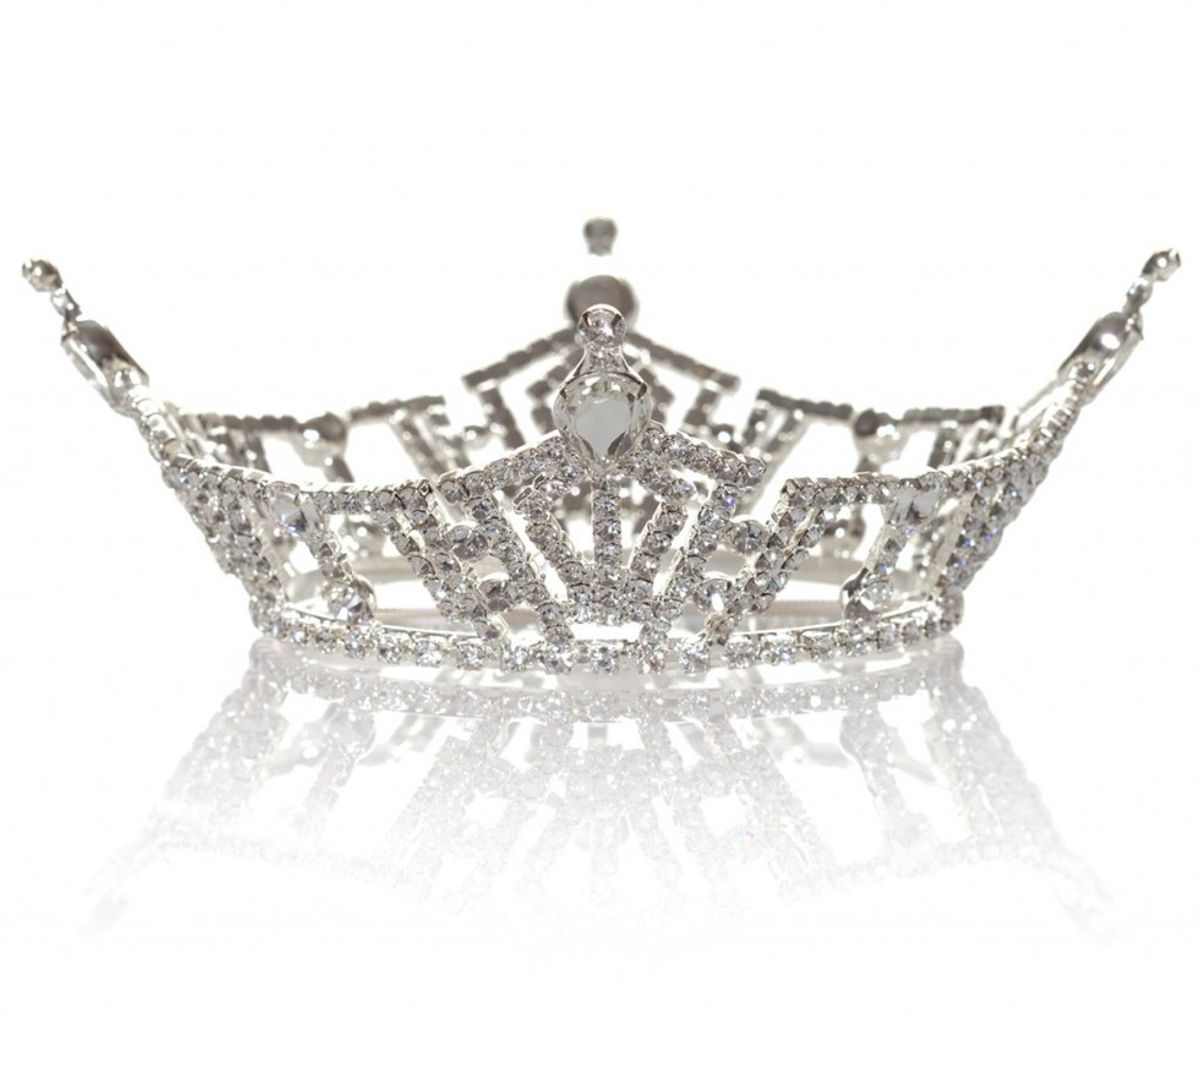 Confessions From Your Not-So-Typical Pageant Girl